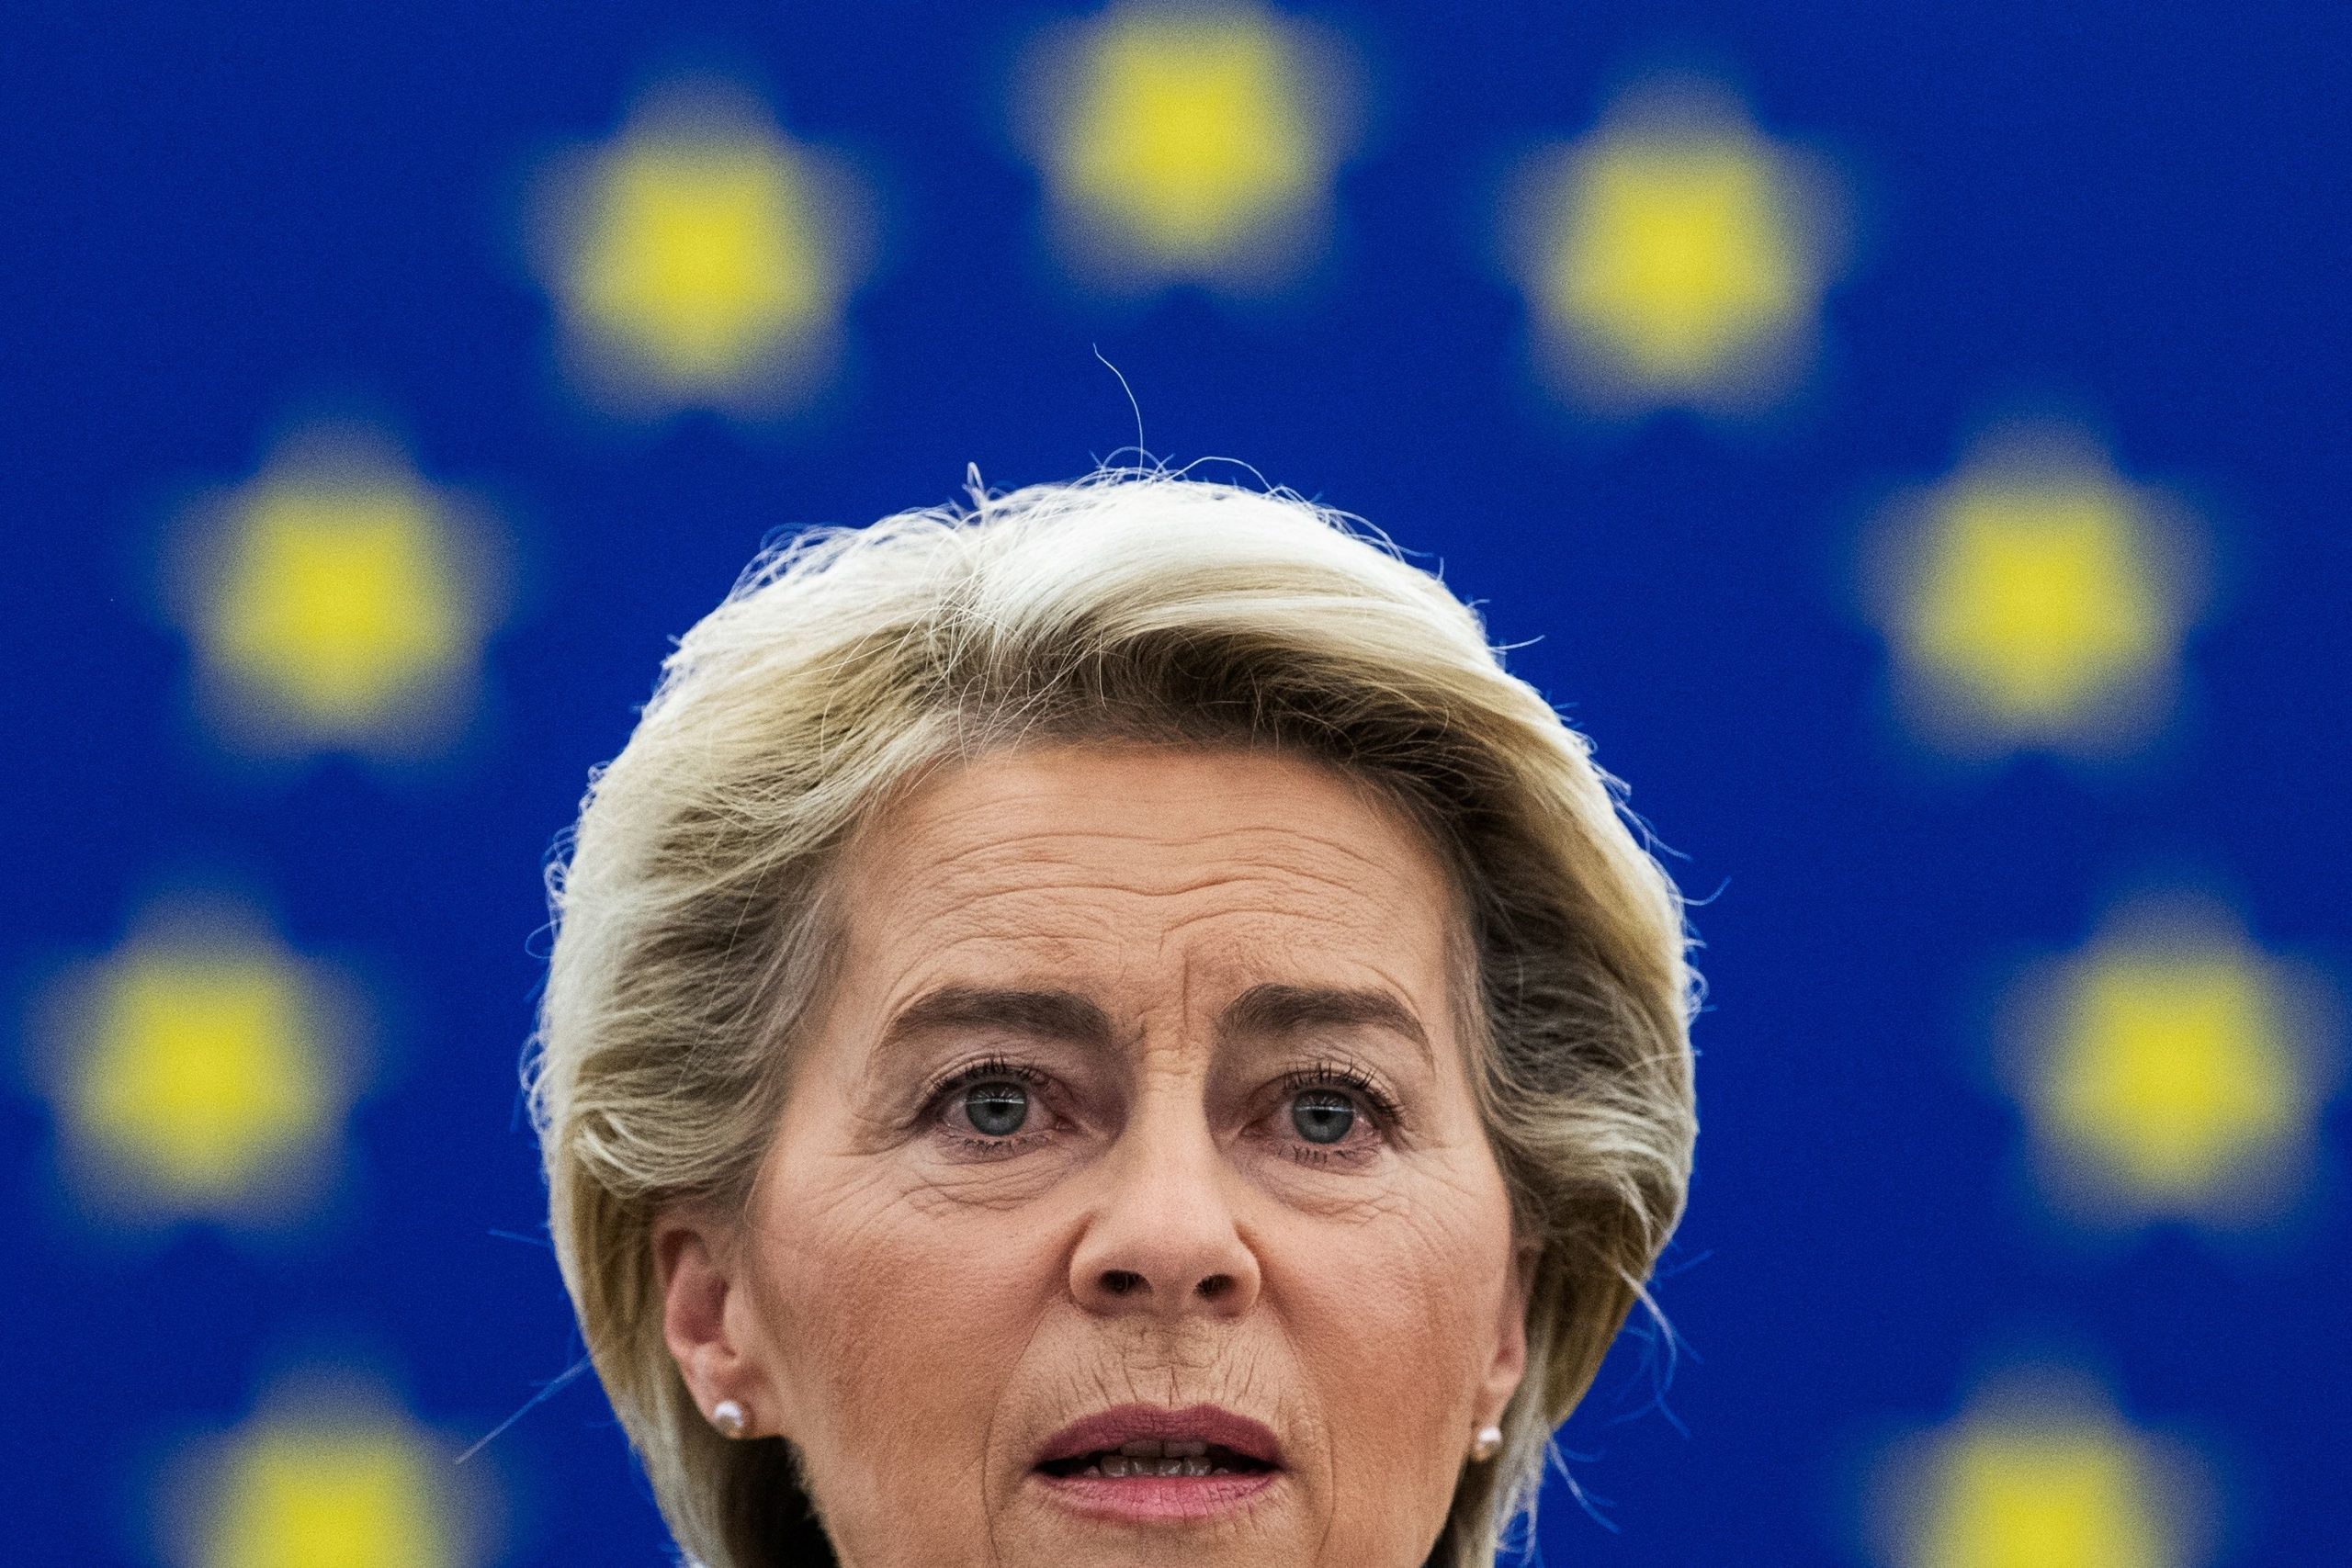 EU Commission President Ursula von der Leyen delivers a speech during a plenary session at the EU Parliament in Strasbourg European Commission President Ursula von der Leyen delivers a speech during a plenary session at the European Parliament in Strasbourg, France July 7, 2021. Patrick Hertzog/Pool via REUTERS POOL